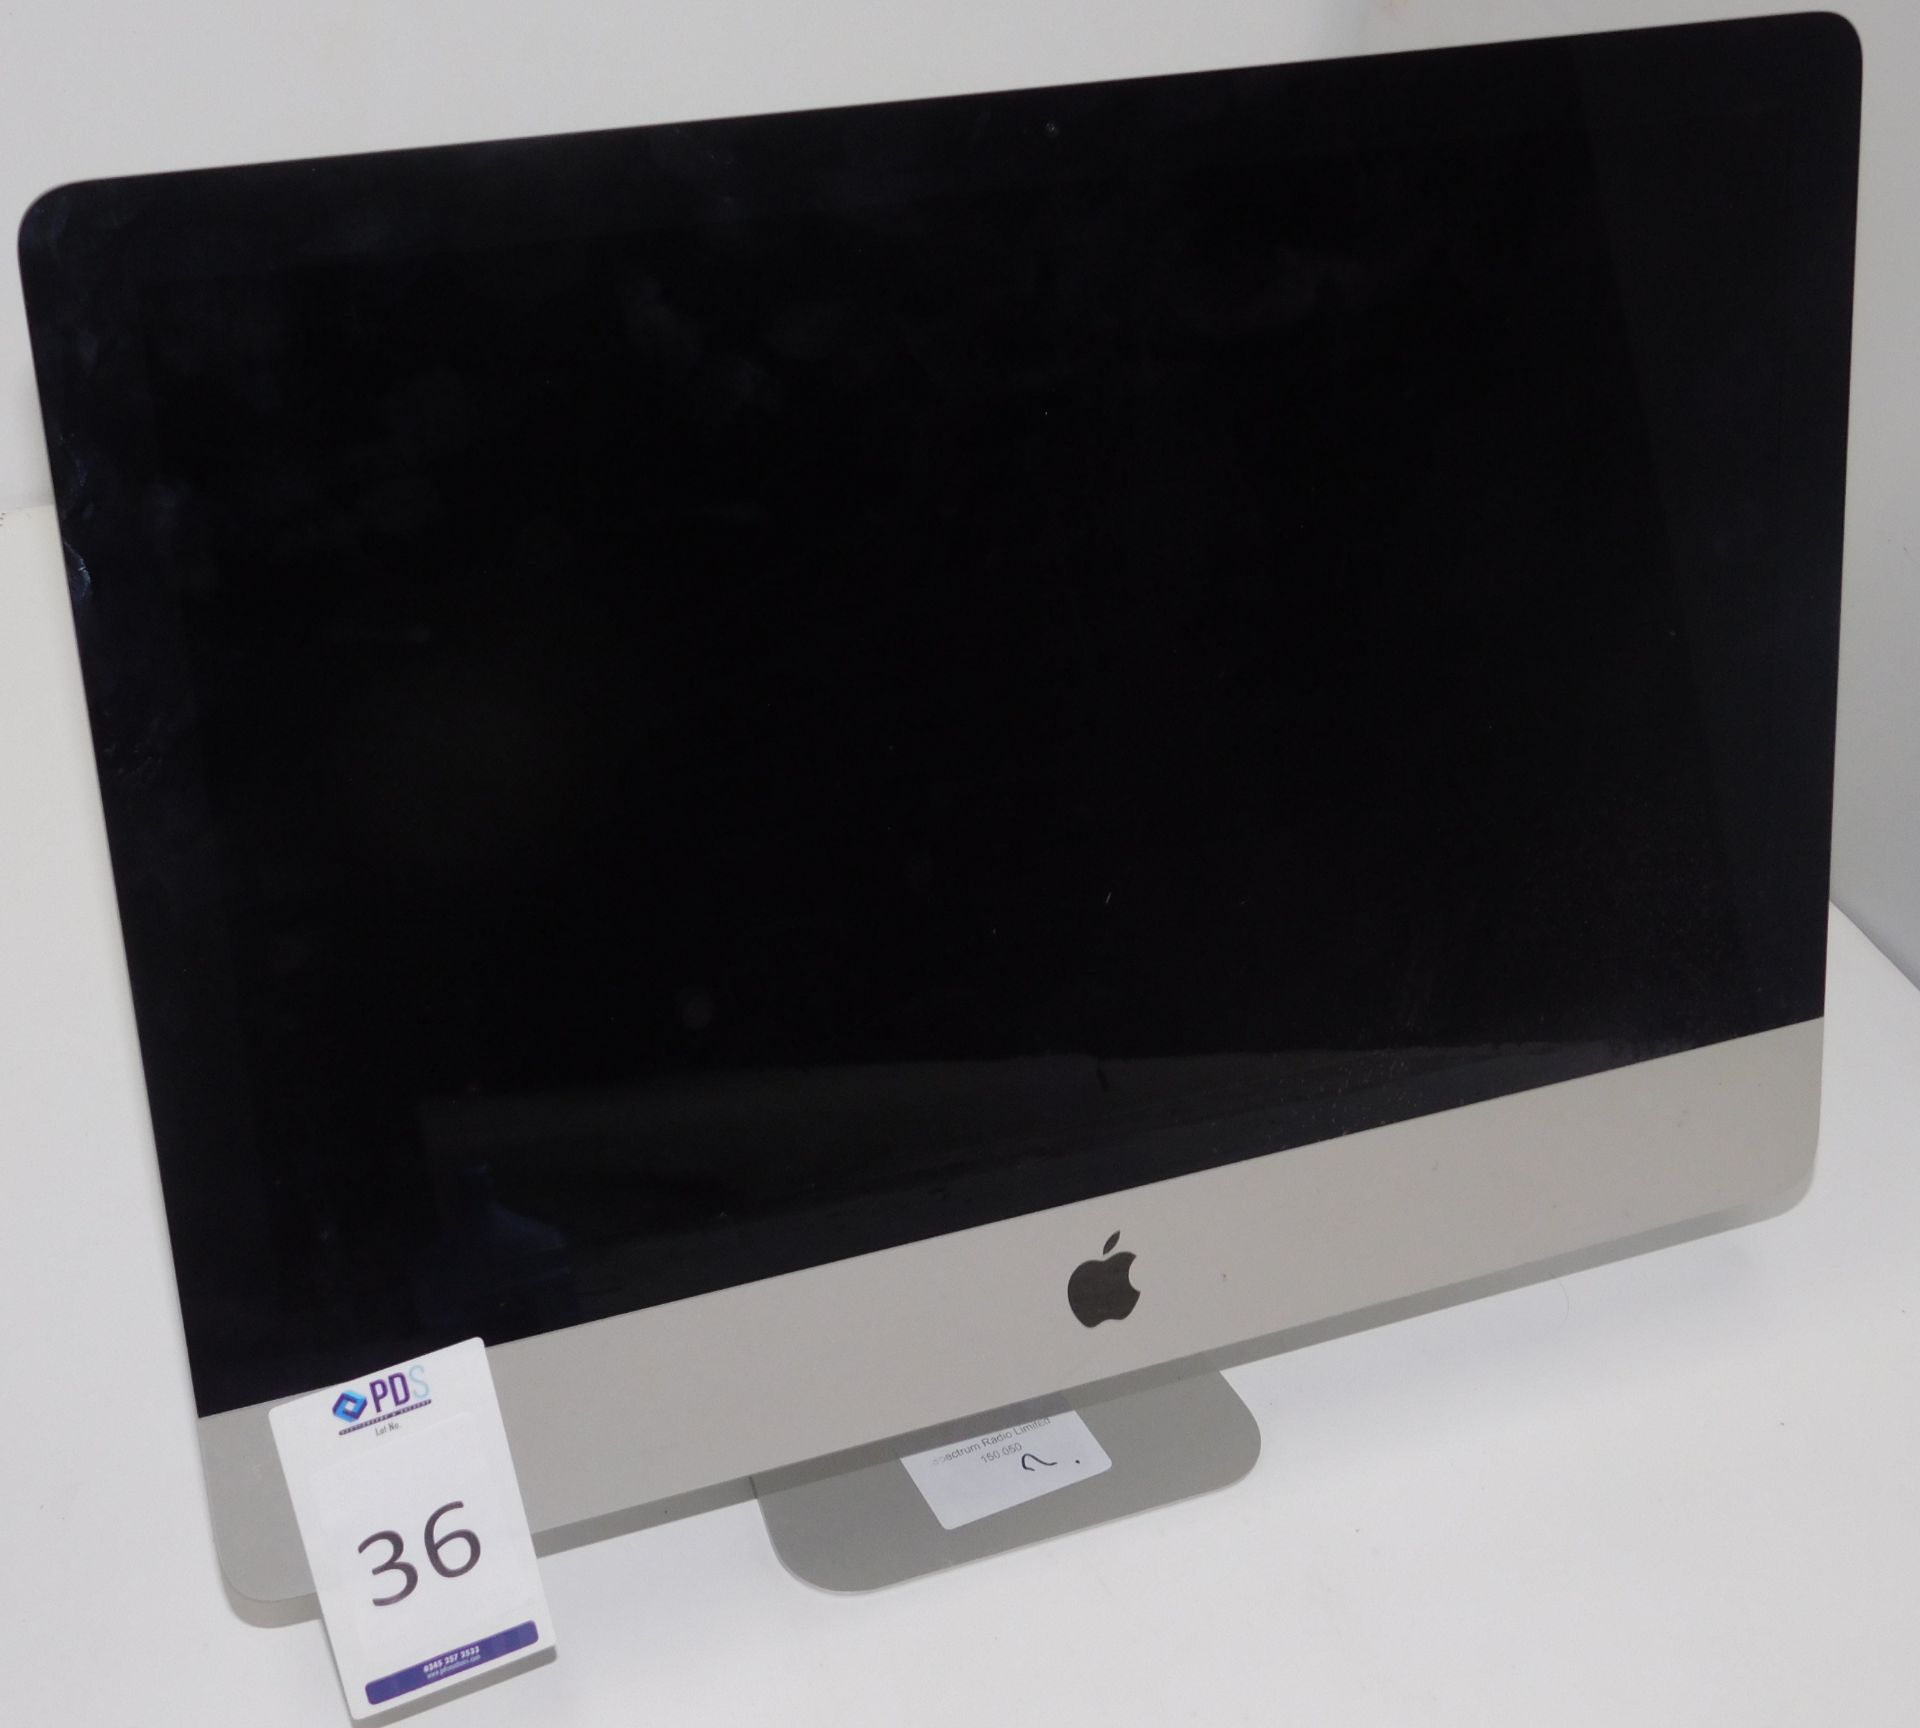 Apple iMac, 21.5 Inch Display, 2.7GHz, Core i5 (2013), Serial Number: DGKM2020F8J7 (Located